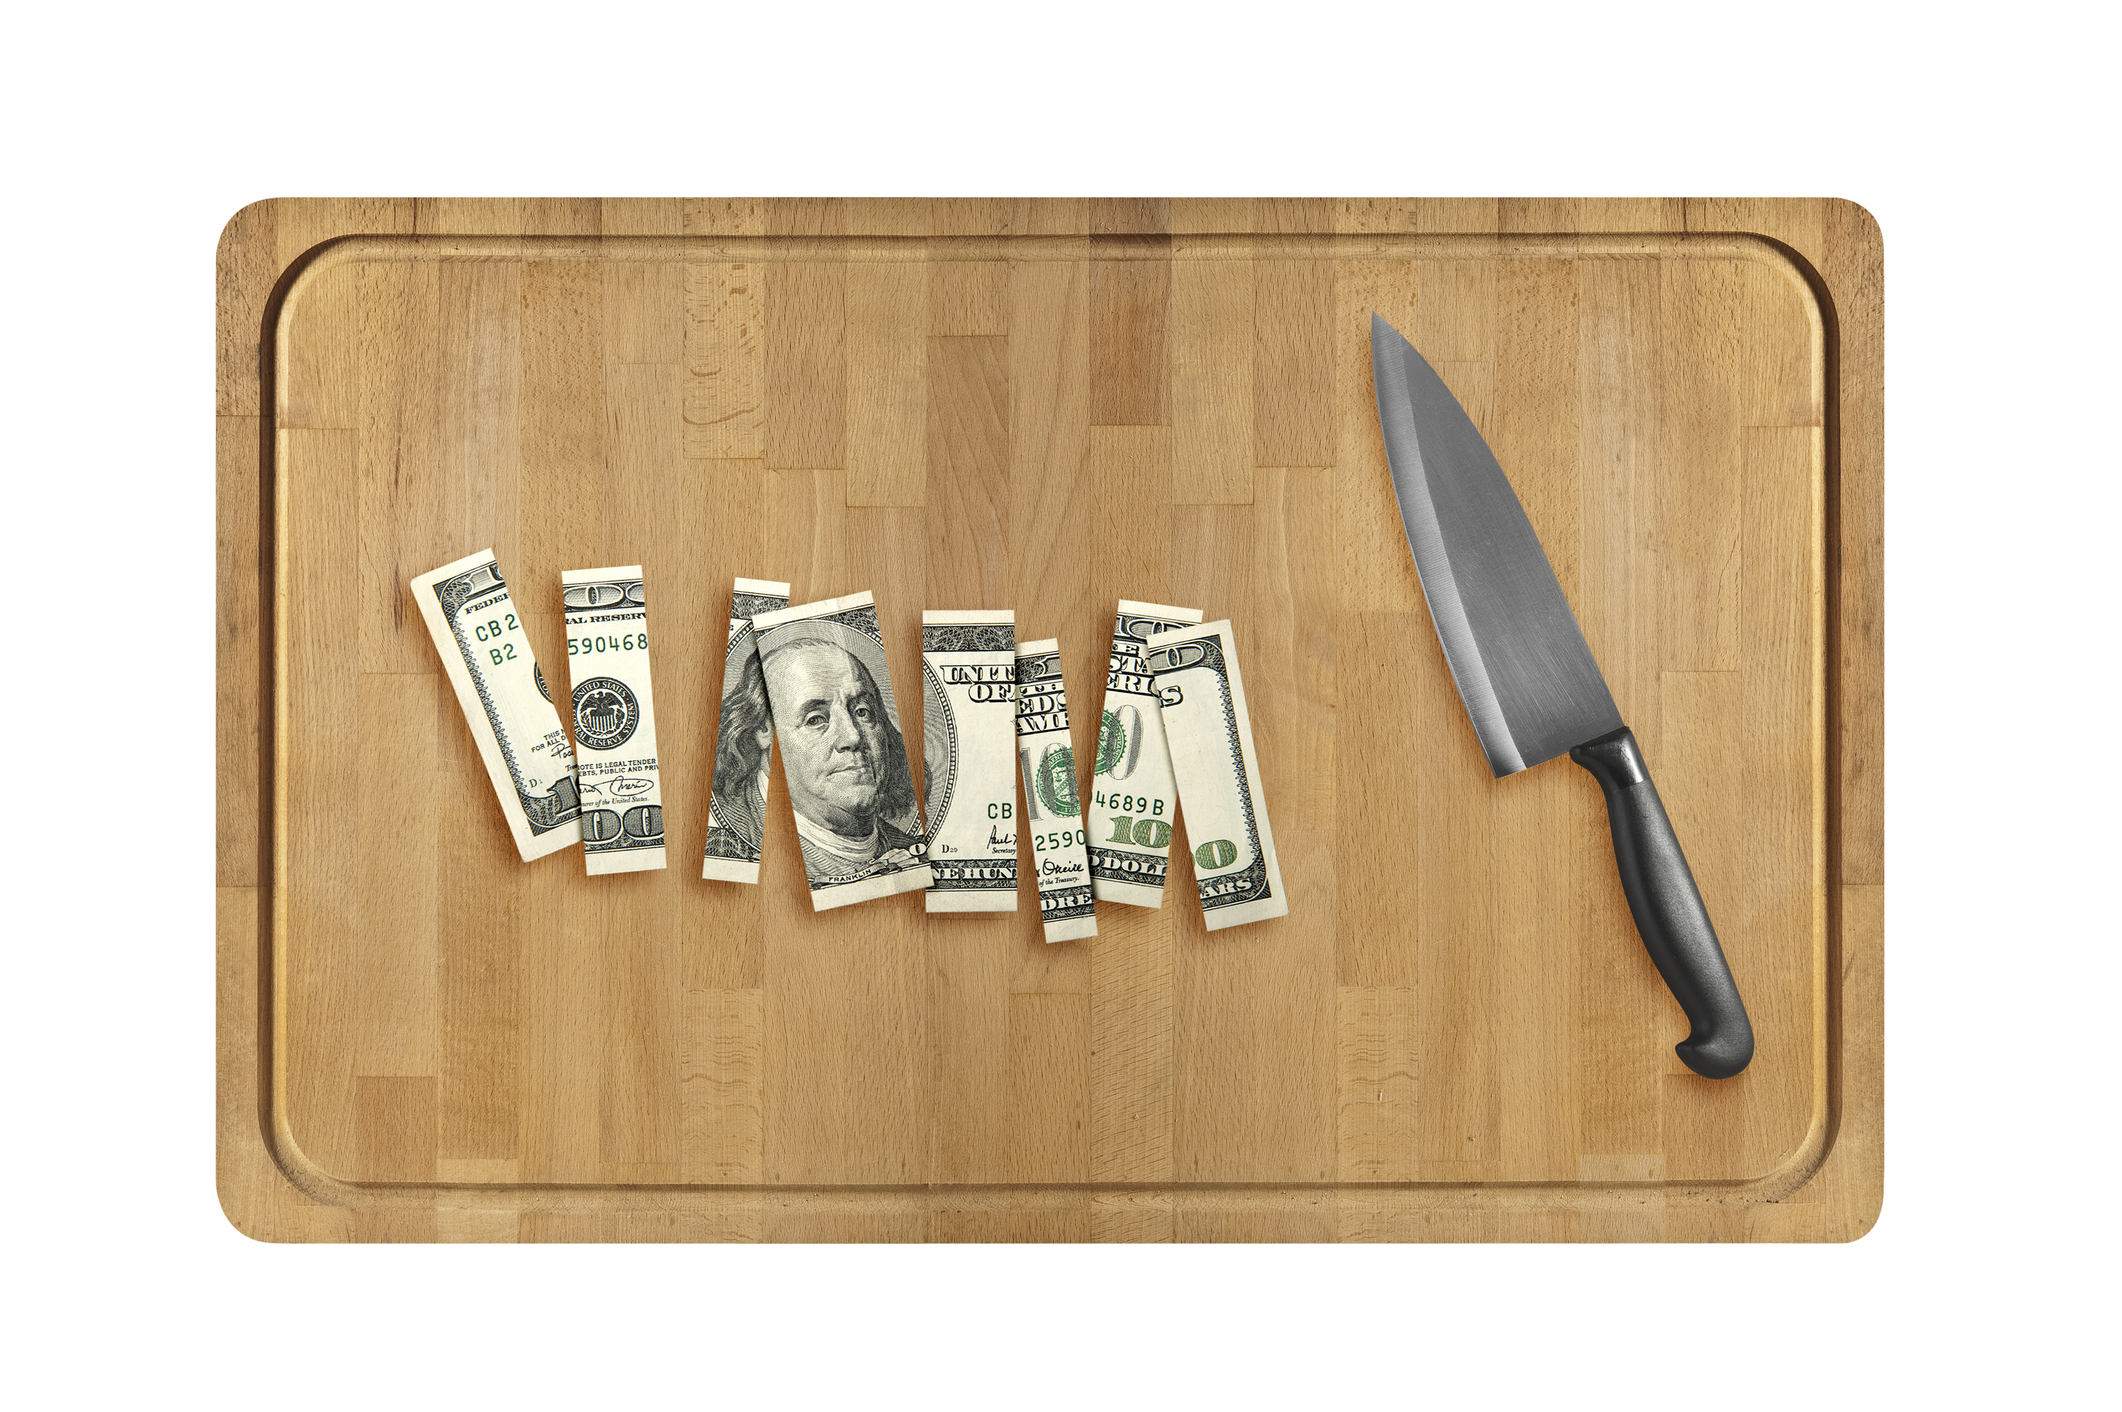 Knife and sliced hundred dollar on Wooden cutting board. isolated on white background.